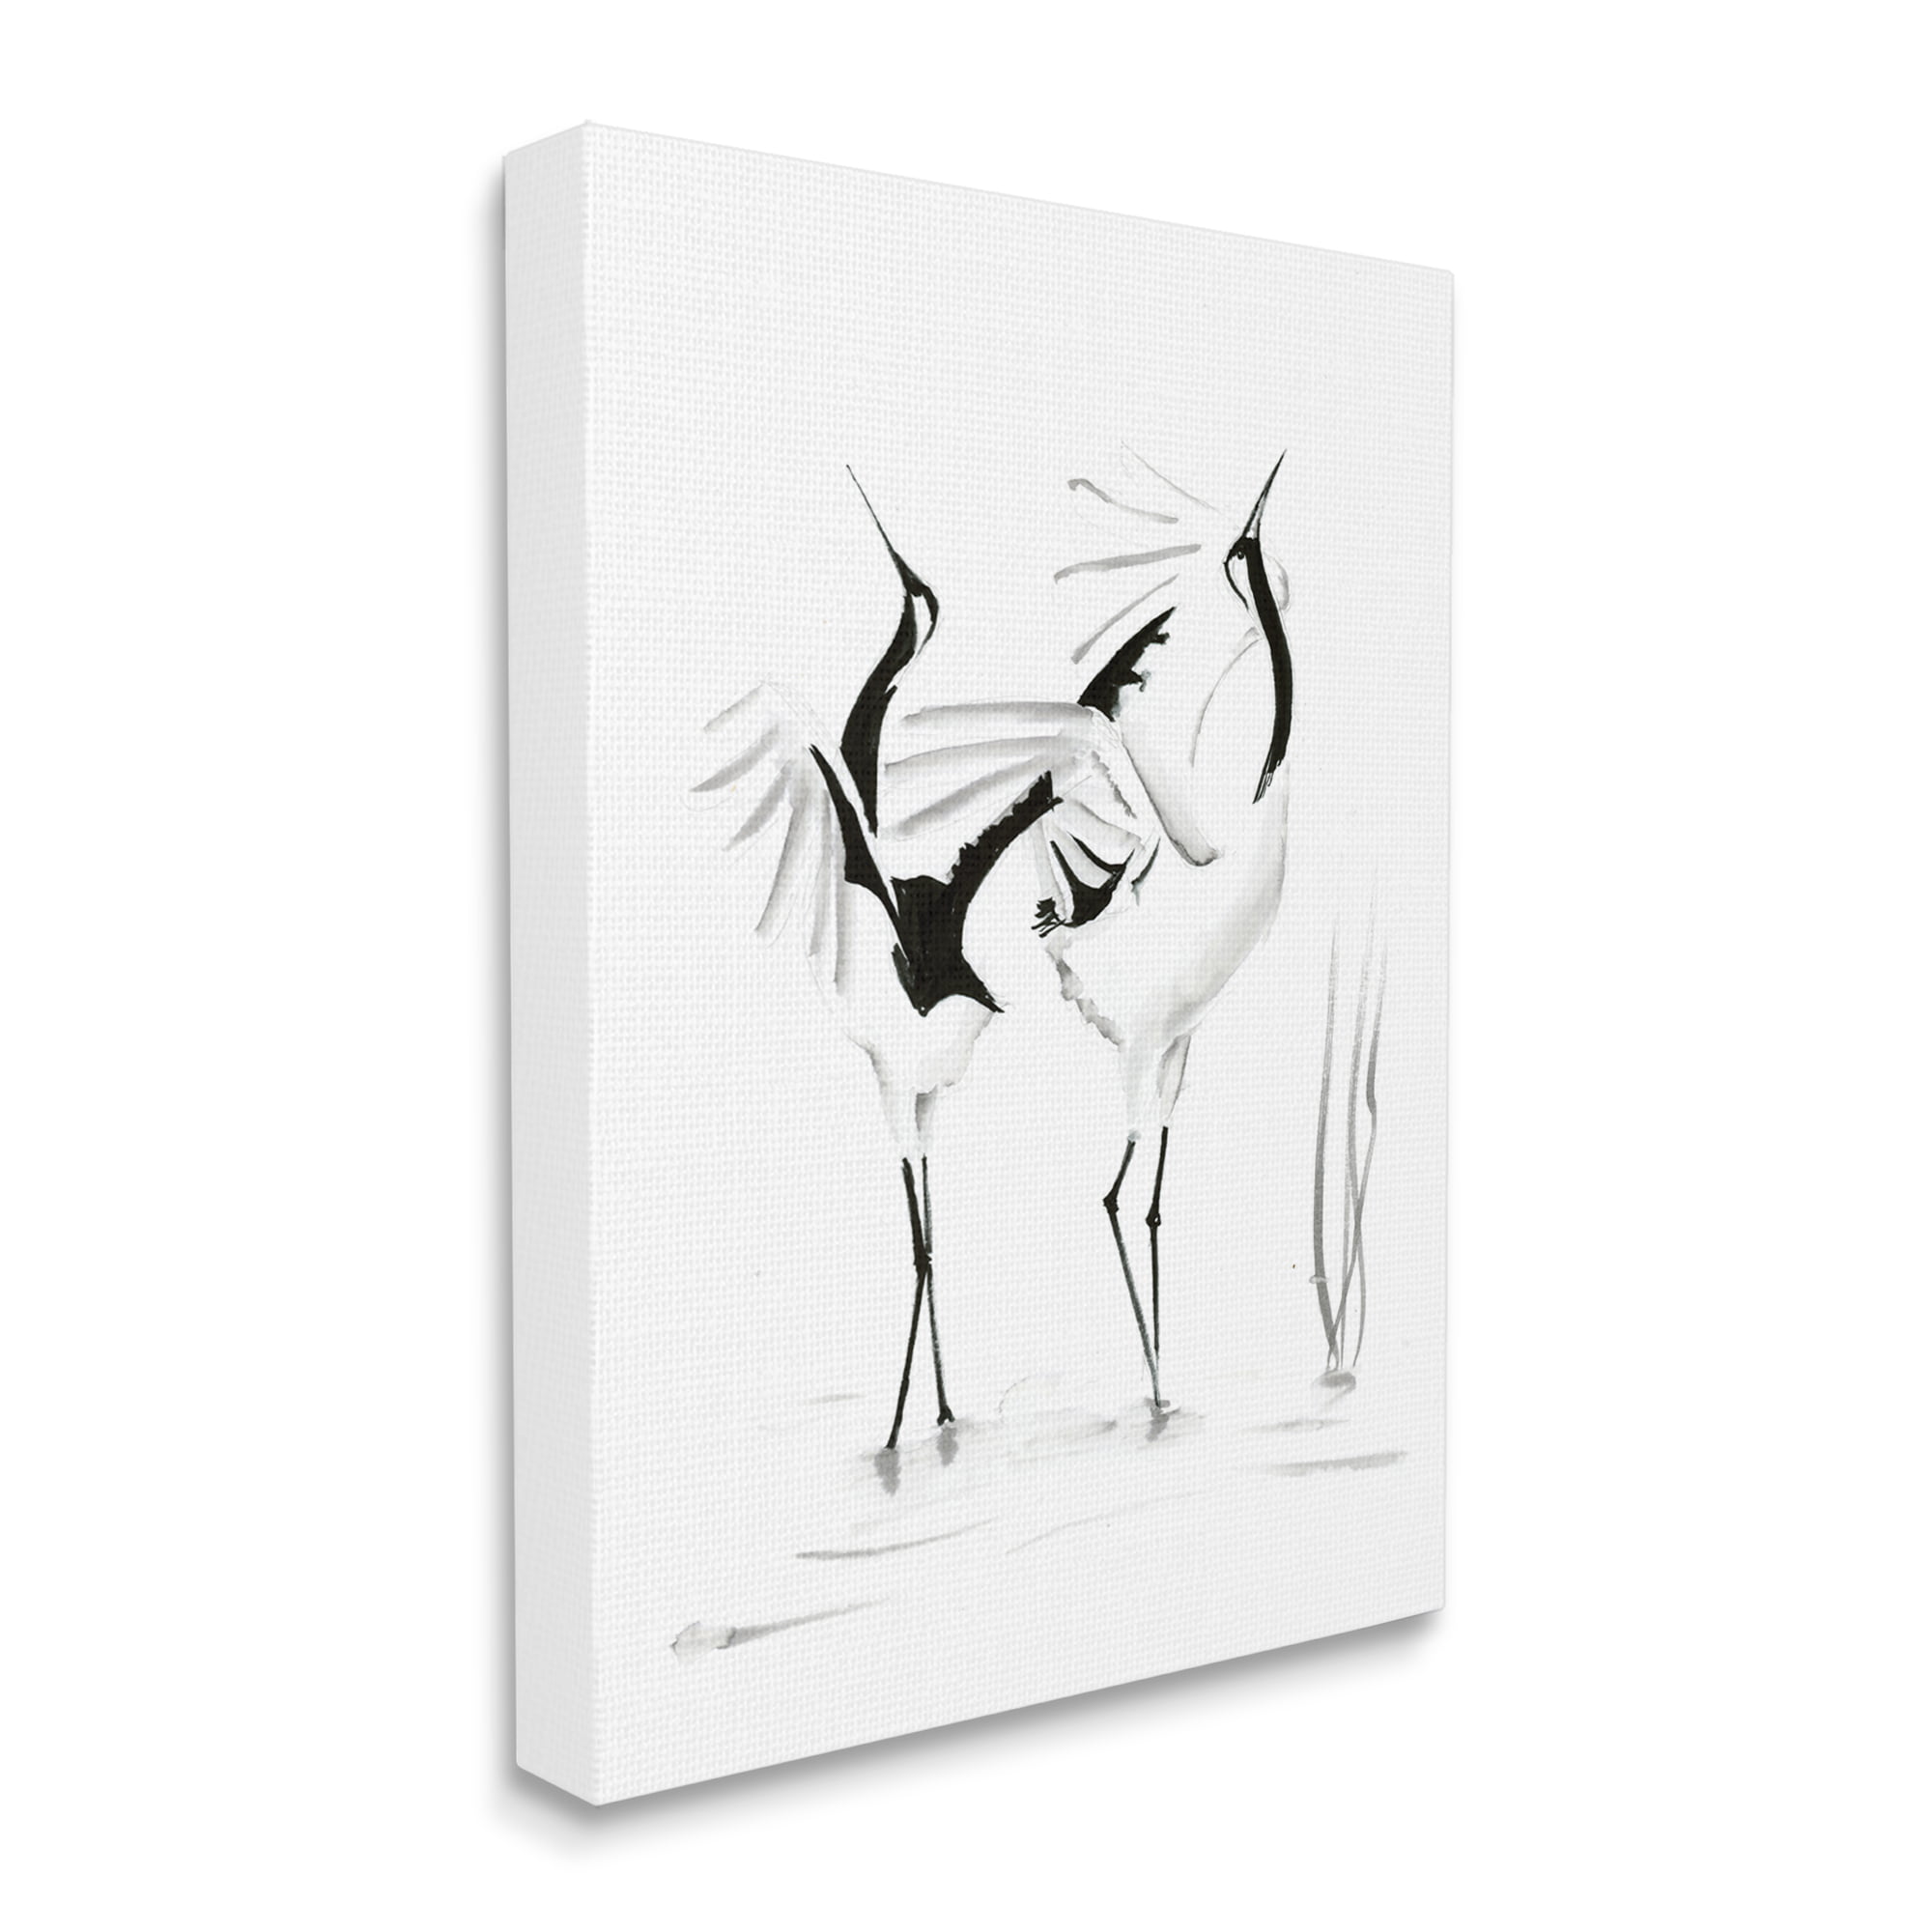 Stupell Industries Dancing Bird Couple Black Crane Water Ripples Designed by Olg Shefranov Canvas Wall Art 